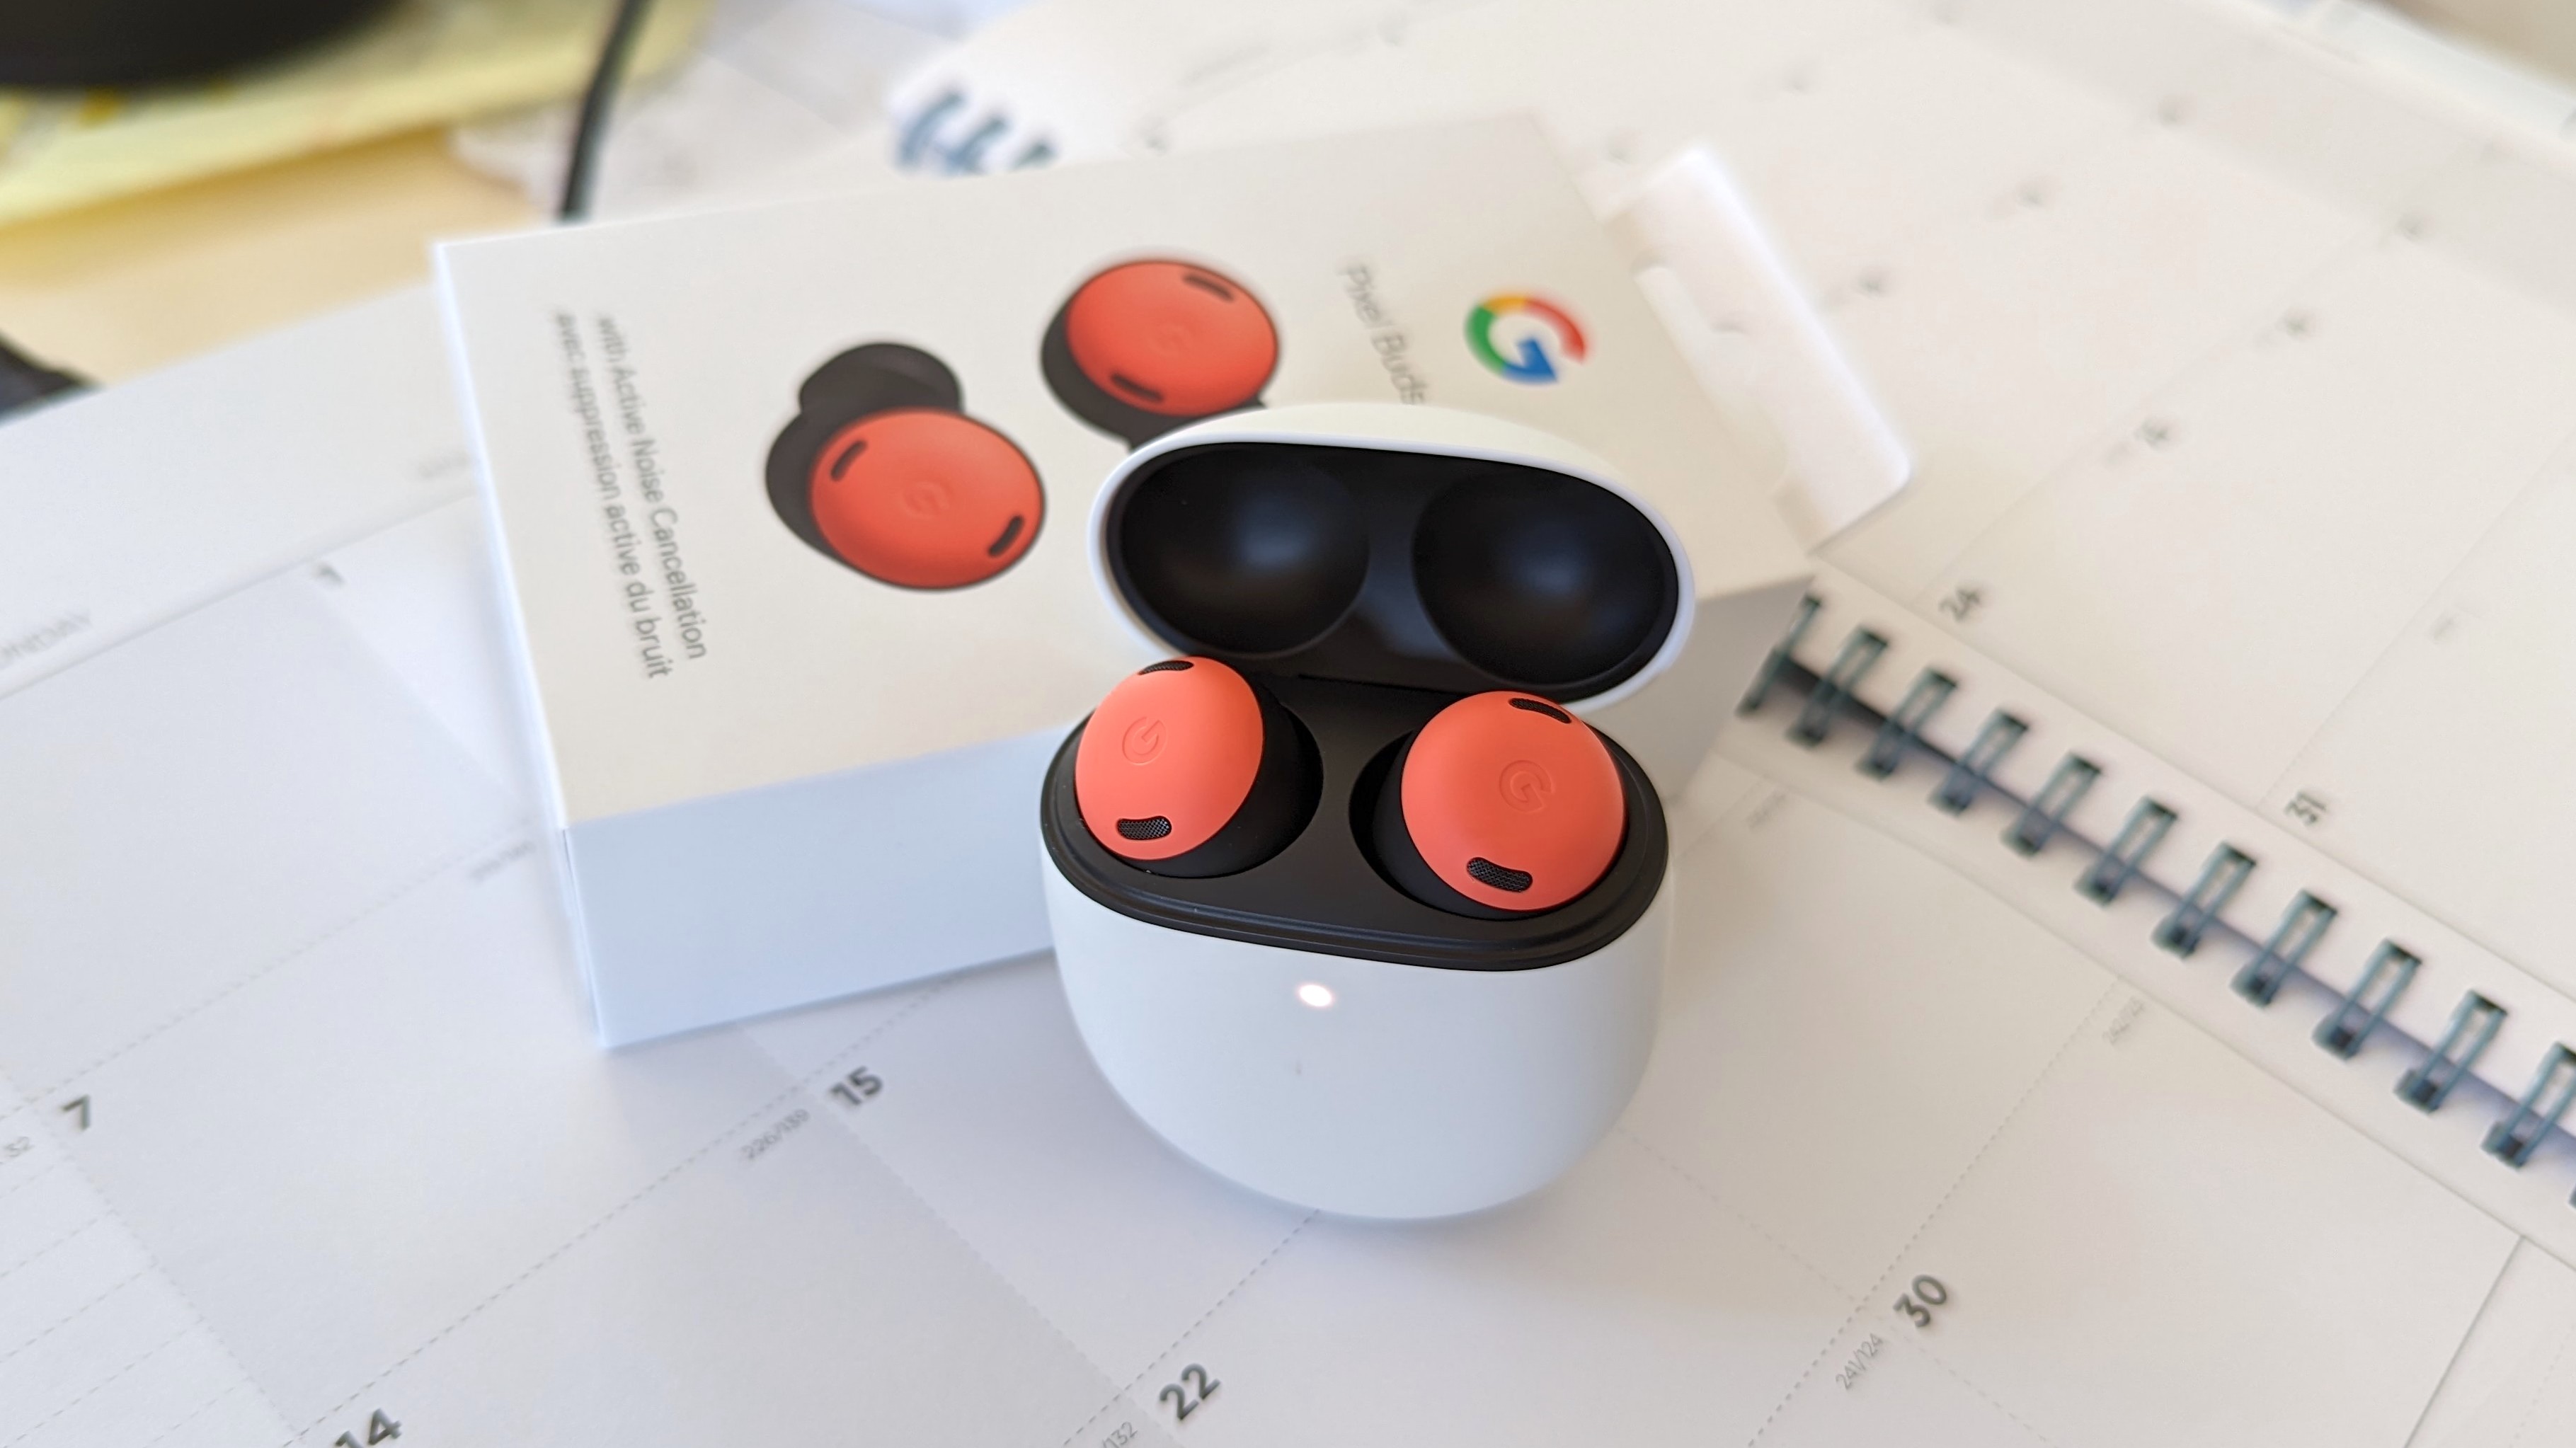 Pixel Buds A-Series leak gives new look at blue color - Android